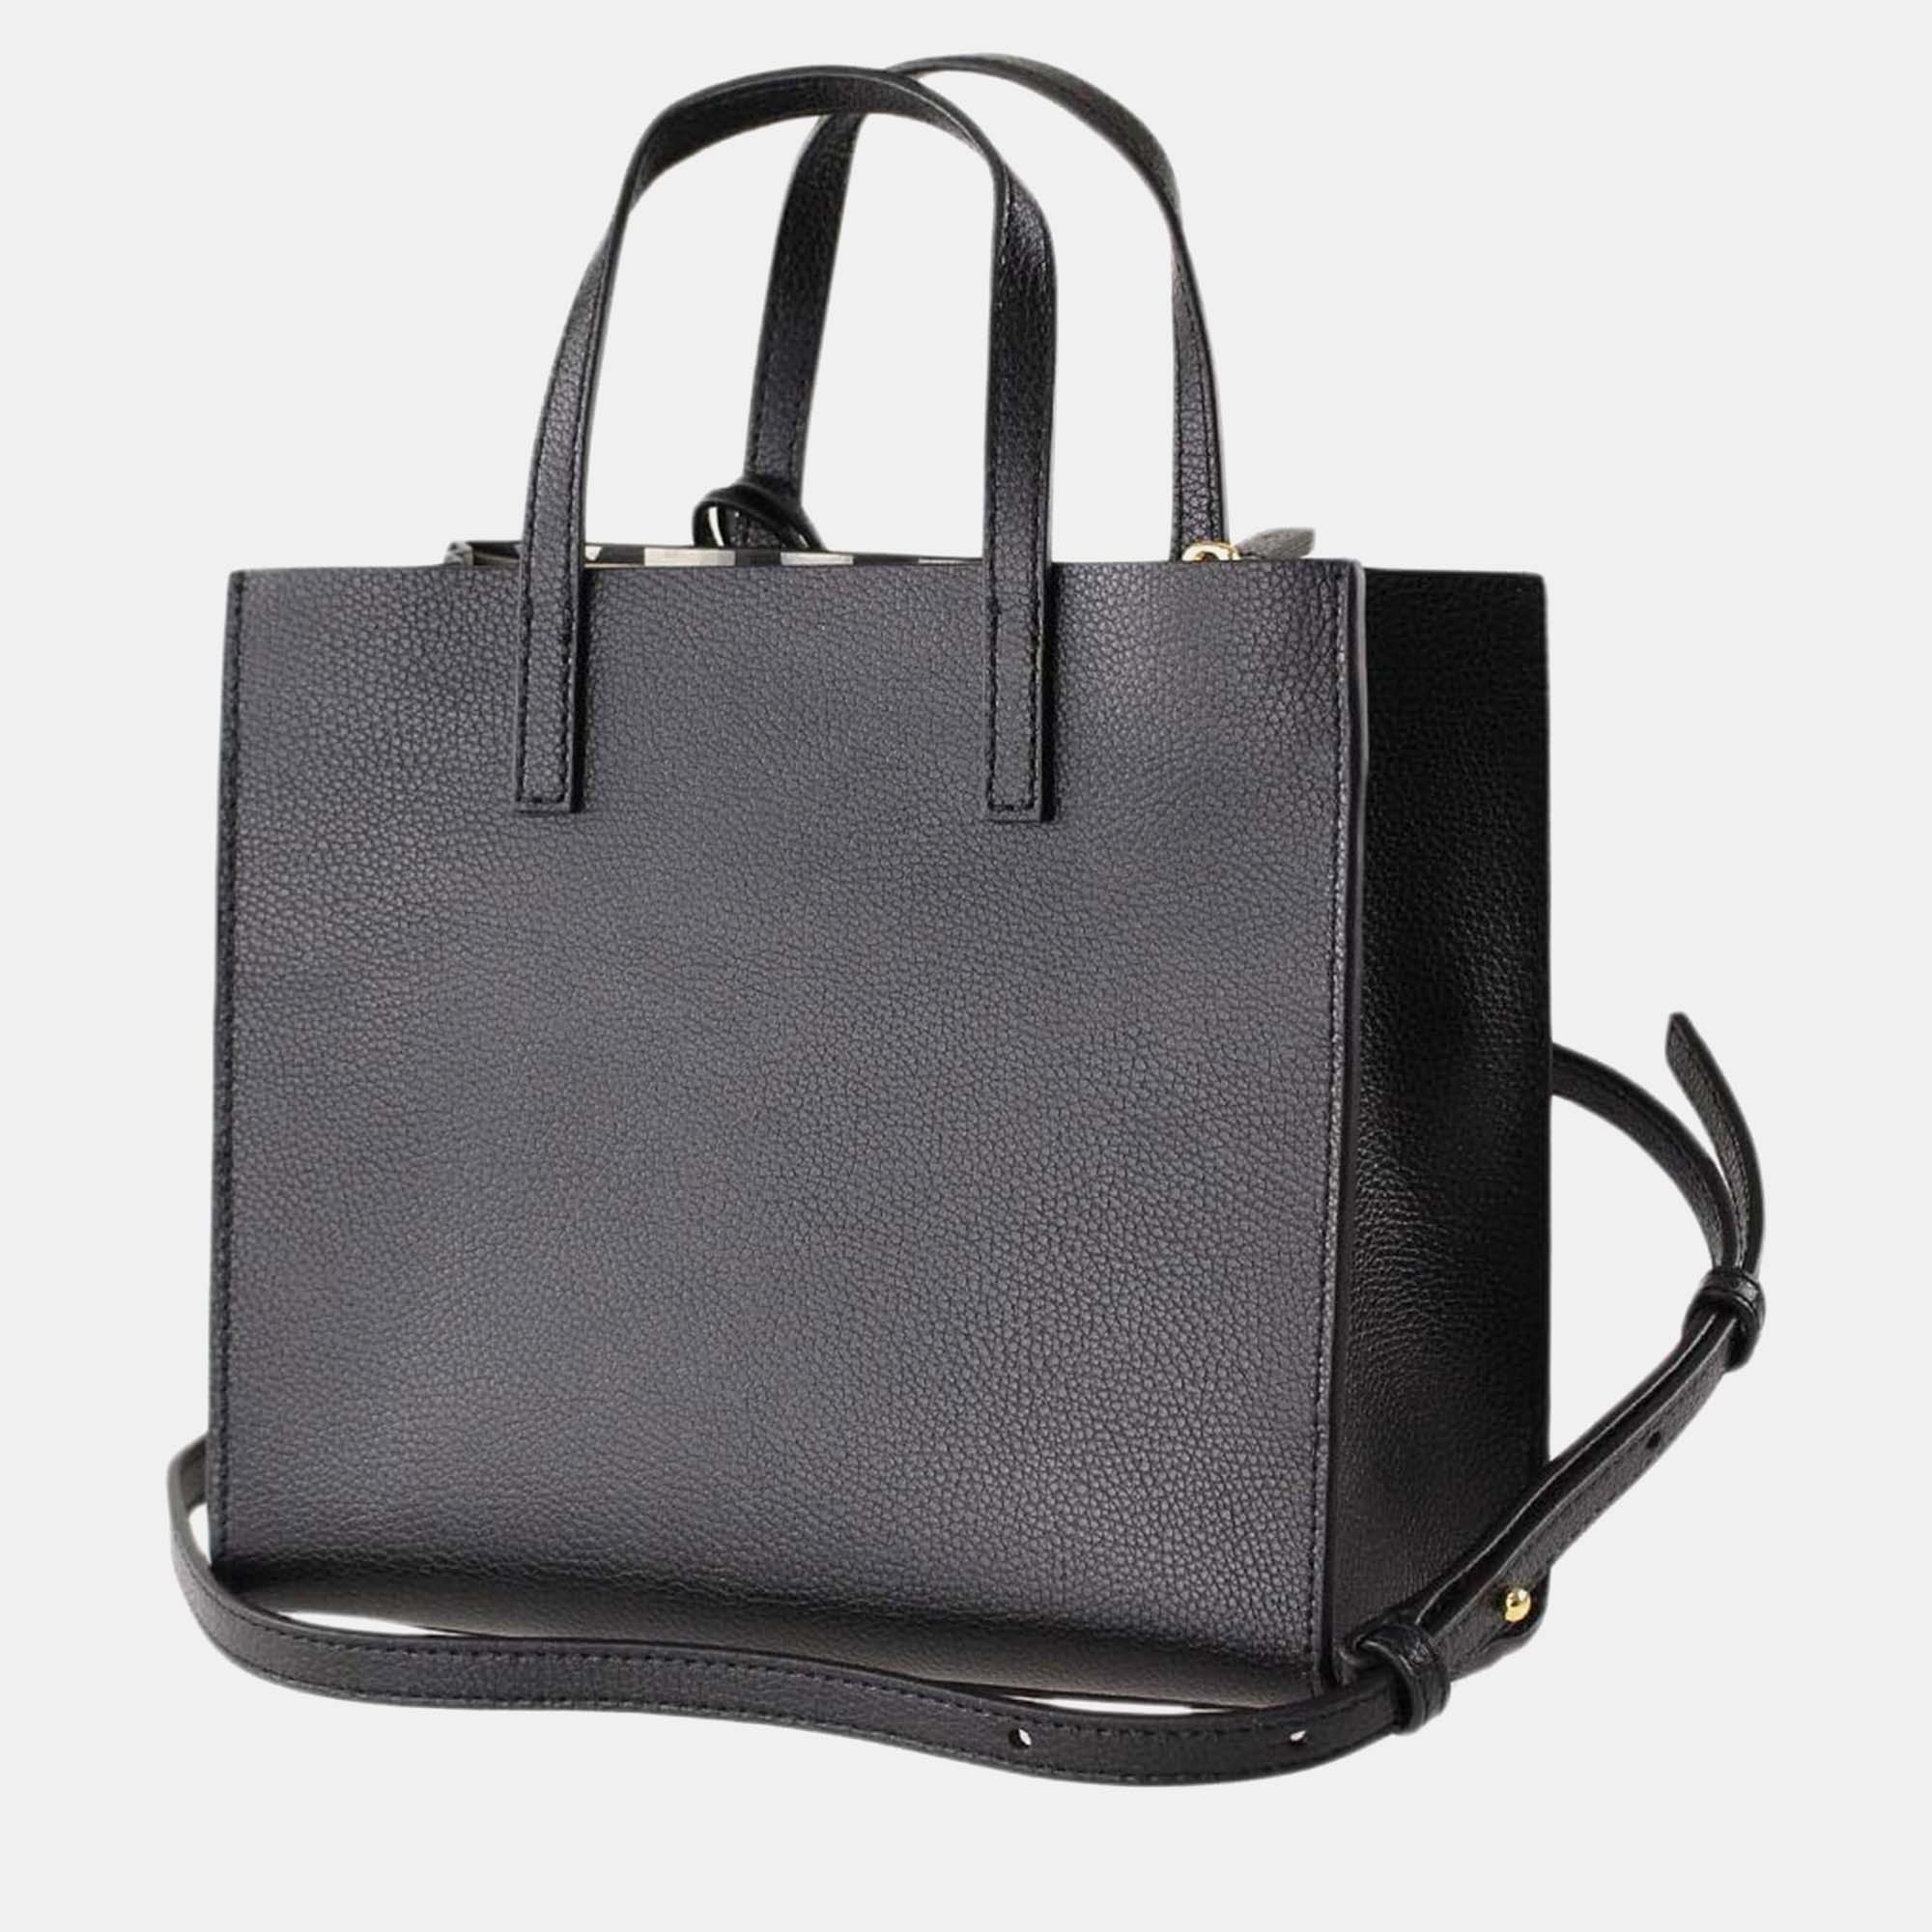 

Marc Jacobs Black Leather Mini Grind Leather Tote Bag